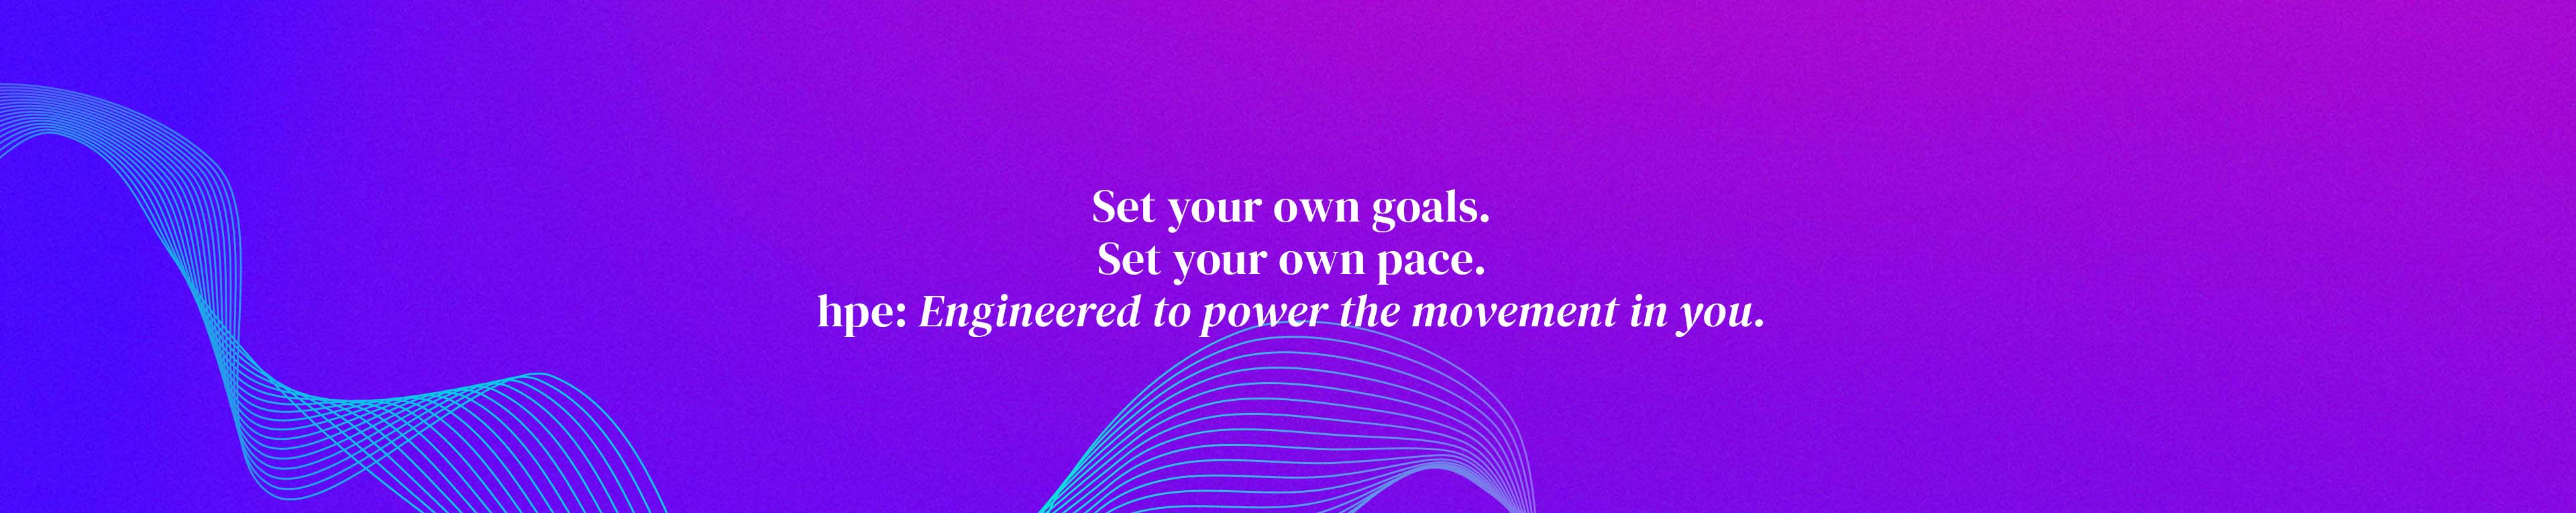 Set your own goals. Set your own pace. hpe: engineered to power the movement in you.